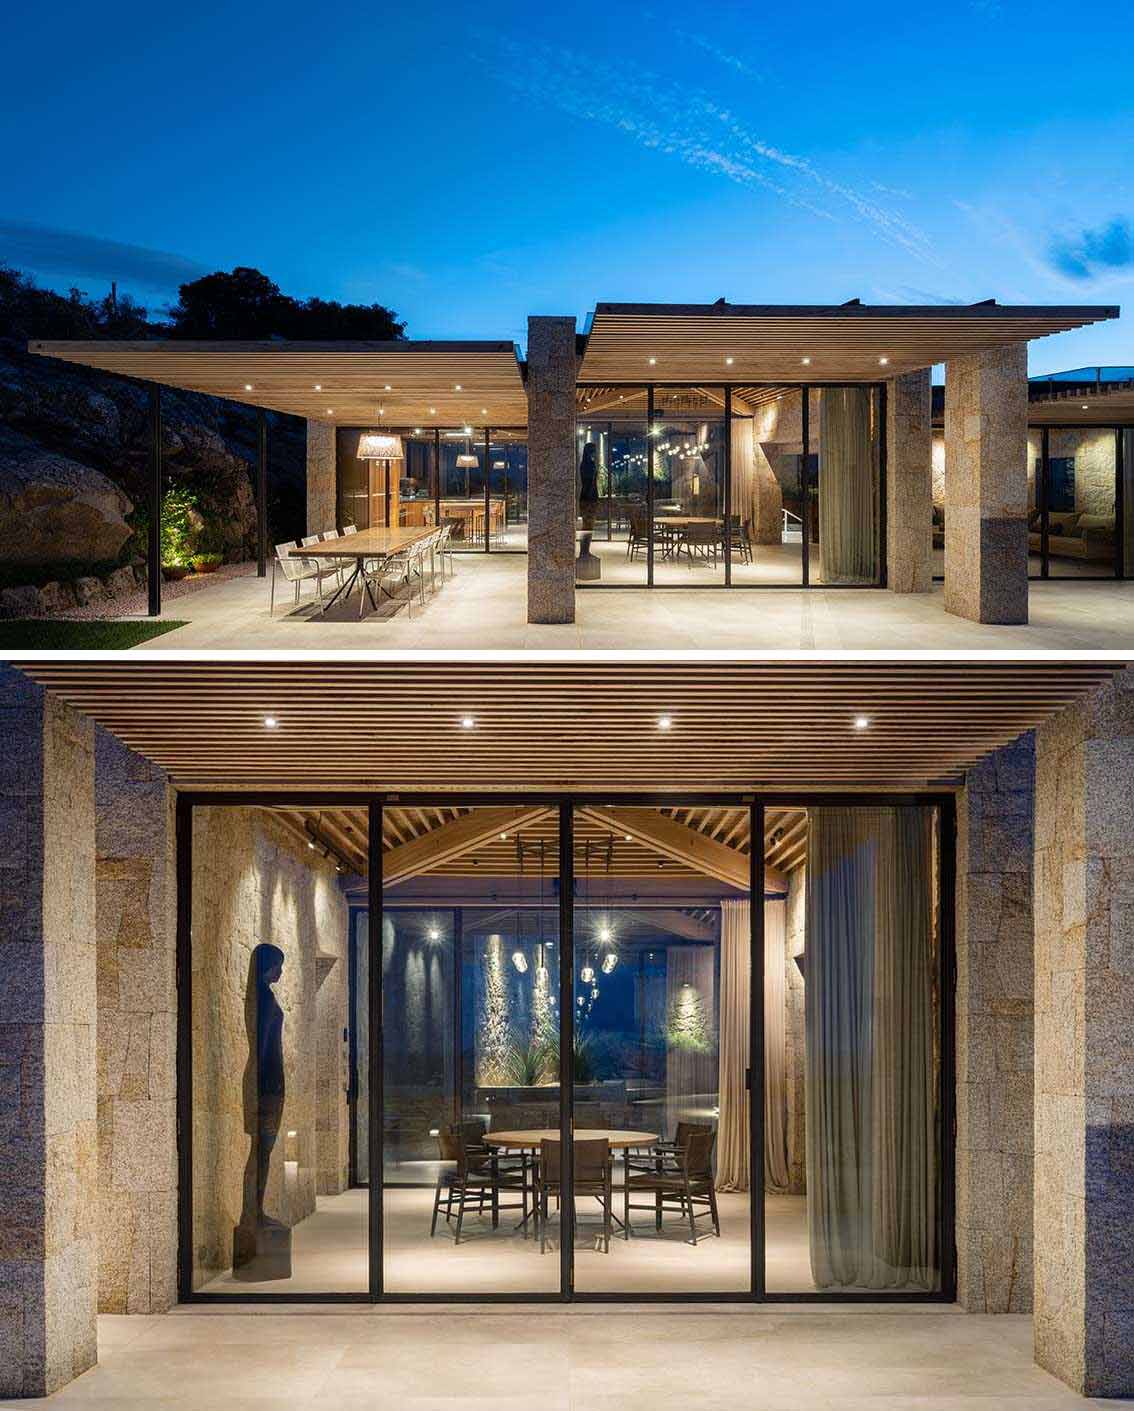 Here's a look at the home at nighttime with exterior lights highlighting the stone and design of the house.